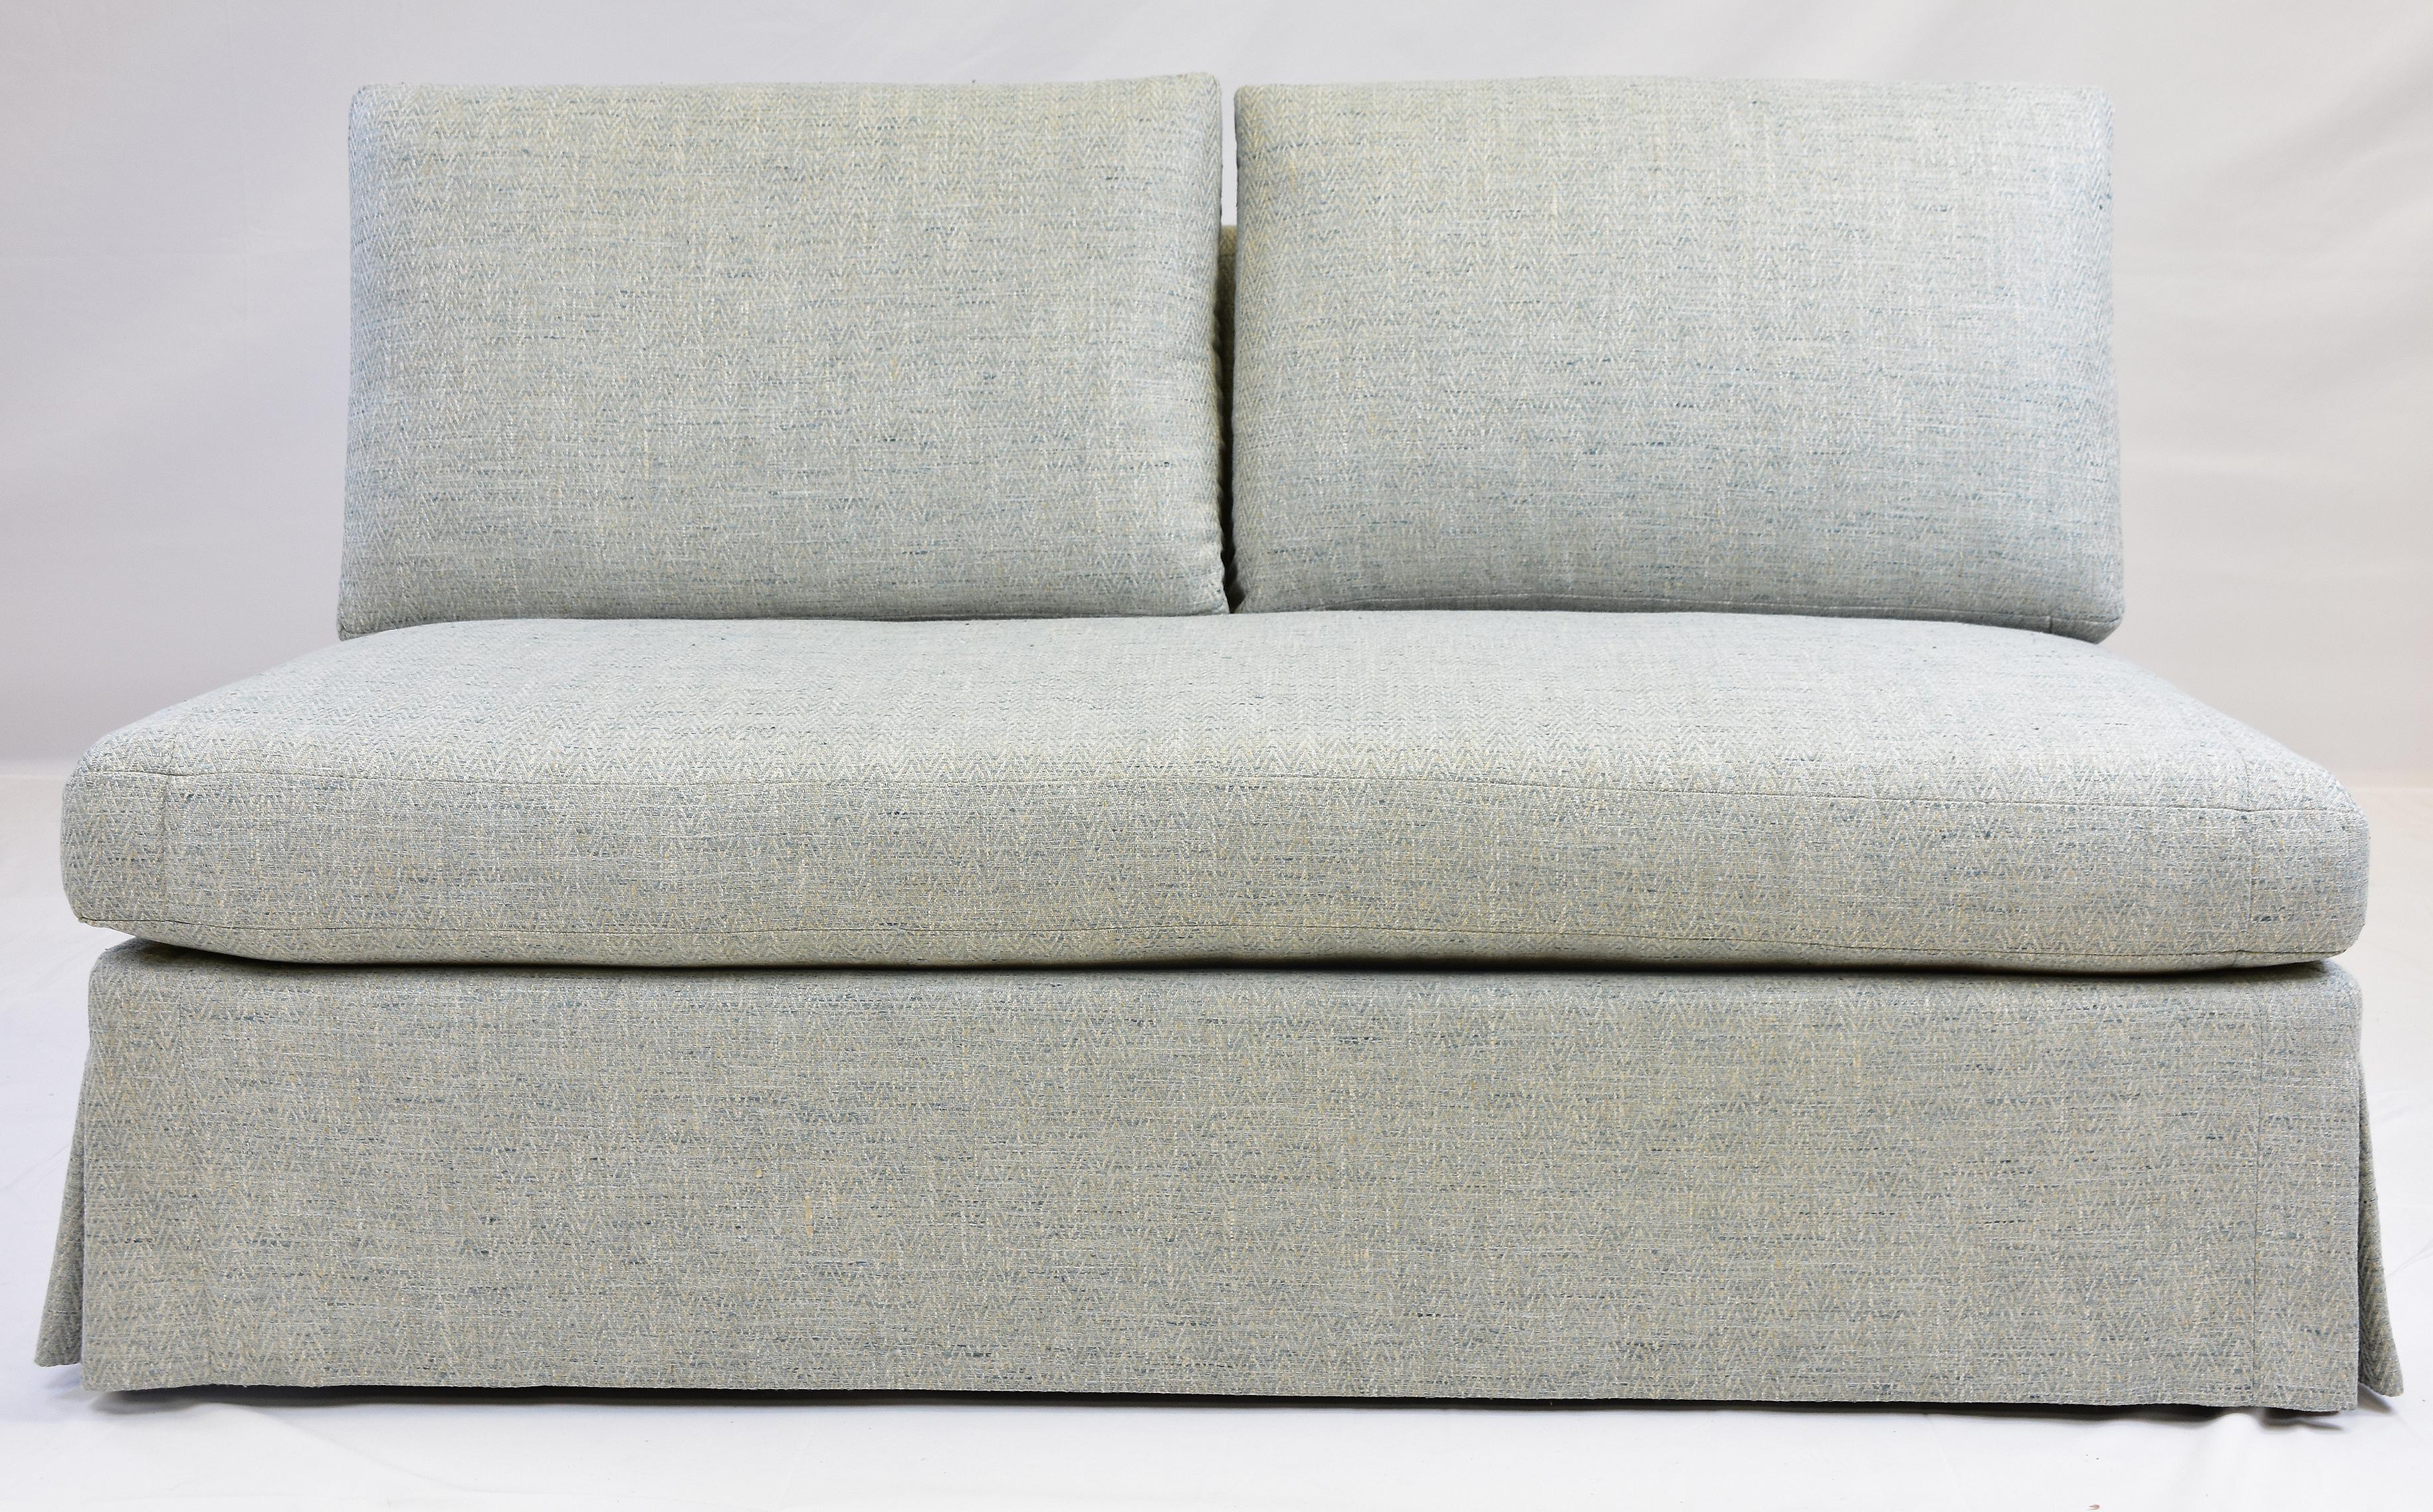 Le Jeune Upholstery Gracie 2 Seat Sofa Showroom Model

Offered for sale is a Gracie S1.923 two-seat sofa showroom model from Le Jeune Upholstery.  This sofa is a medium-scaled armless sofa that is built for comfortable seating with a single